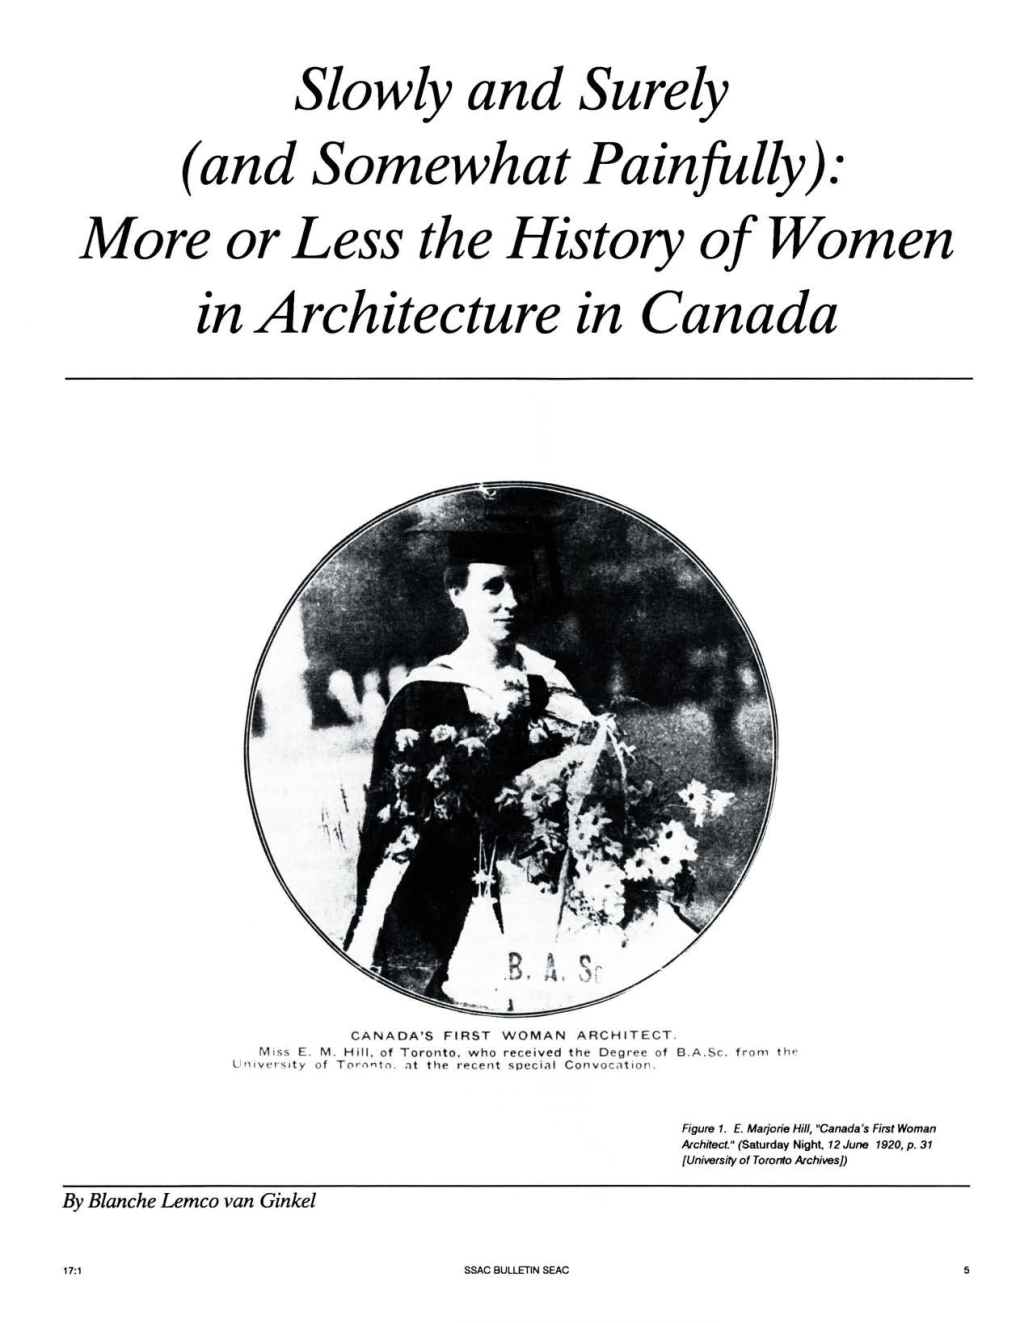 Or Less the History of Women in Architecture in Canada